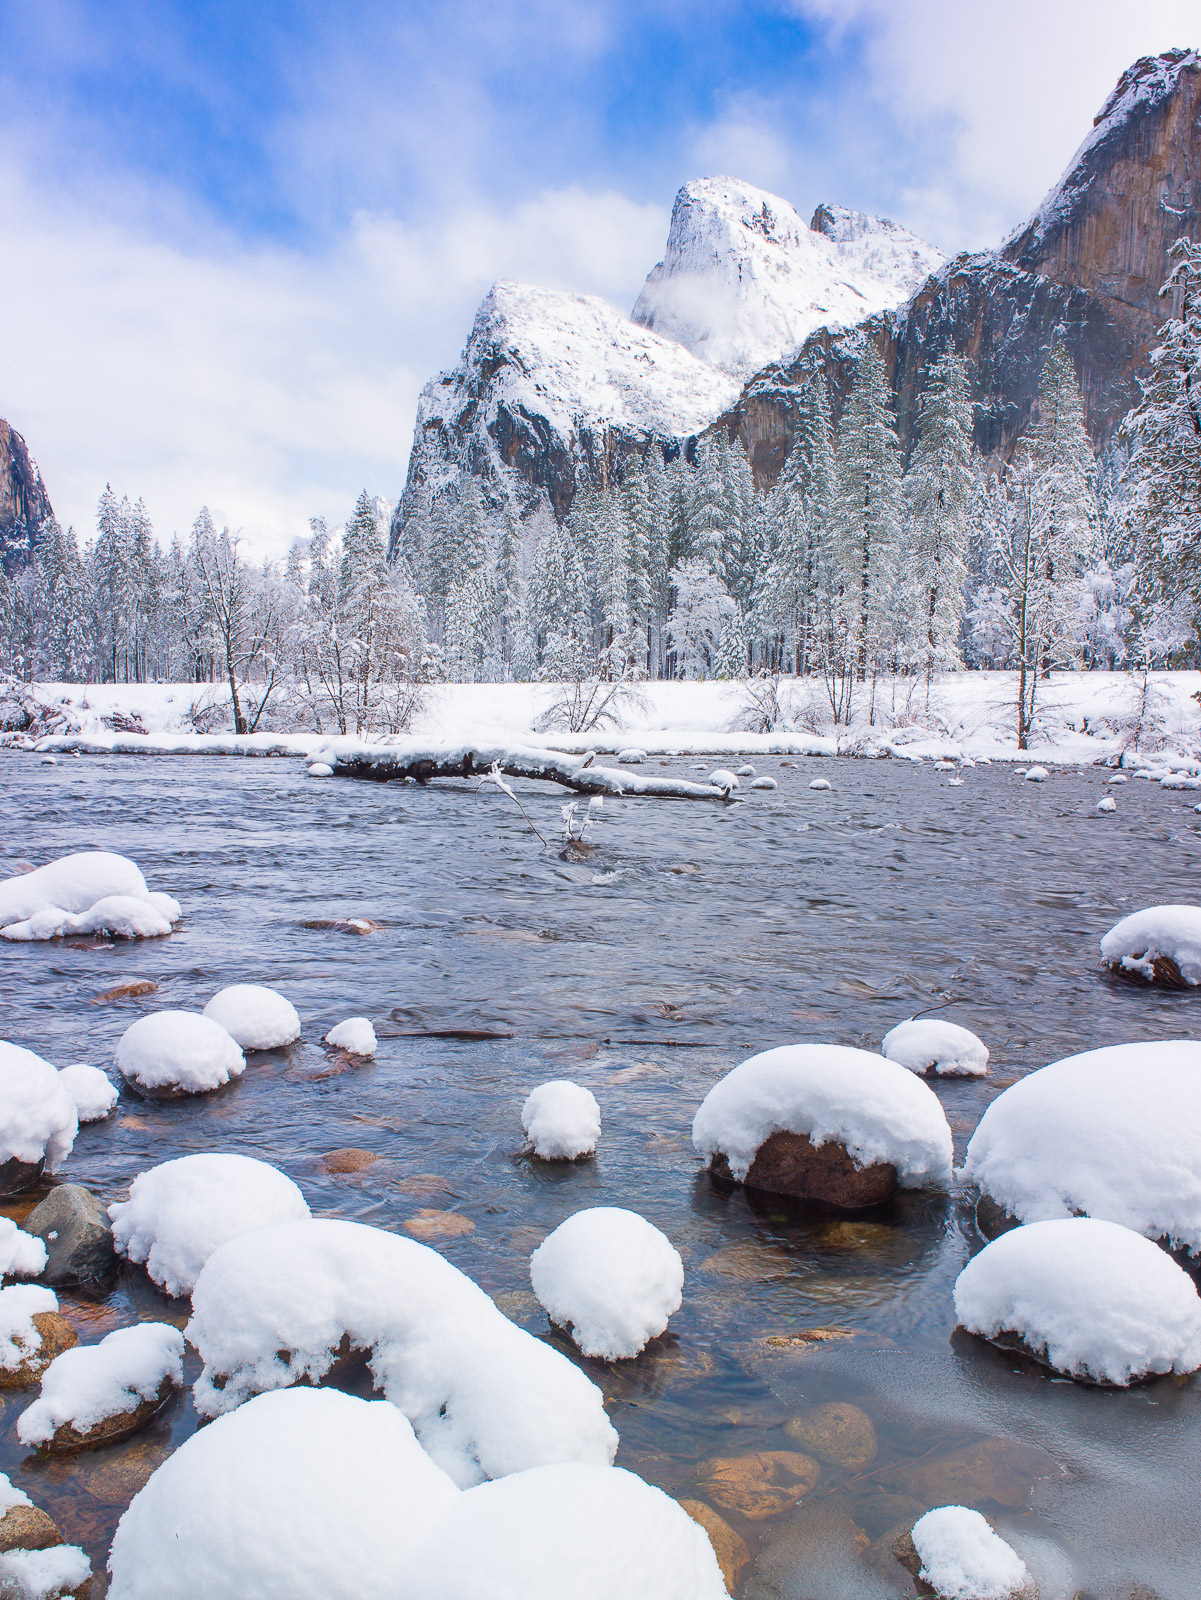 There is a feeling of being in a special wonderland when you are in Yosemite with fresh snowfall. The place becomes a winter...